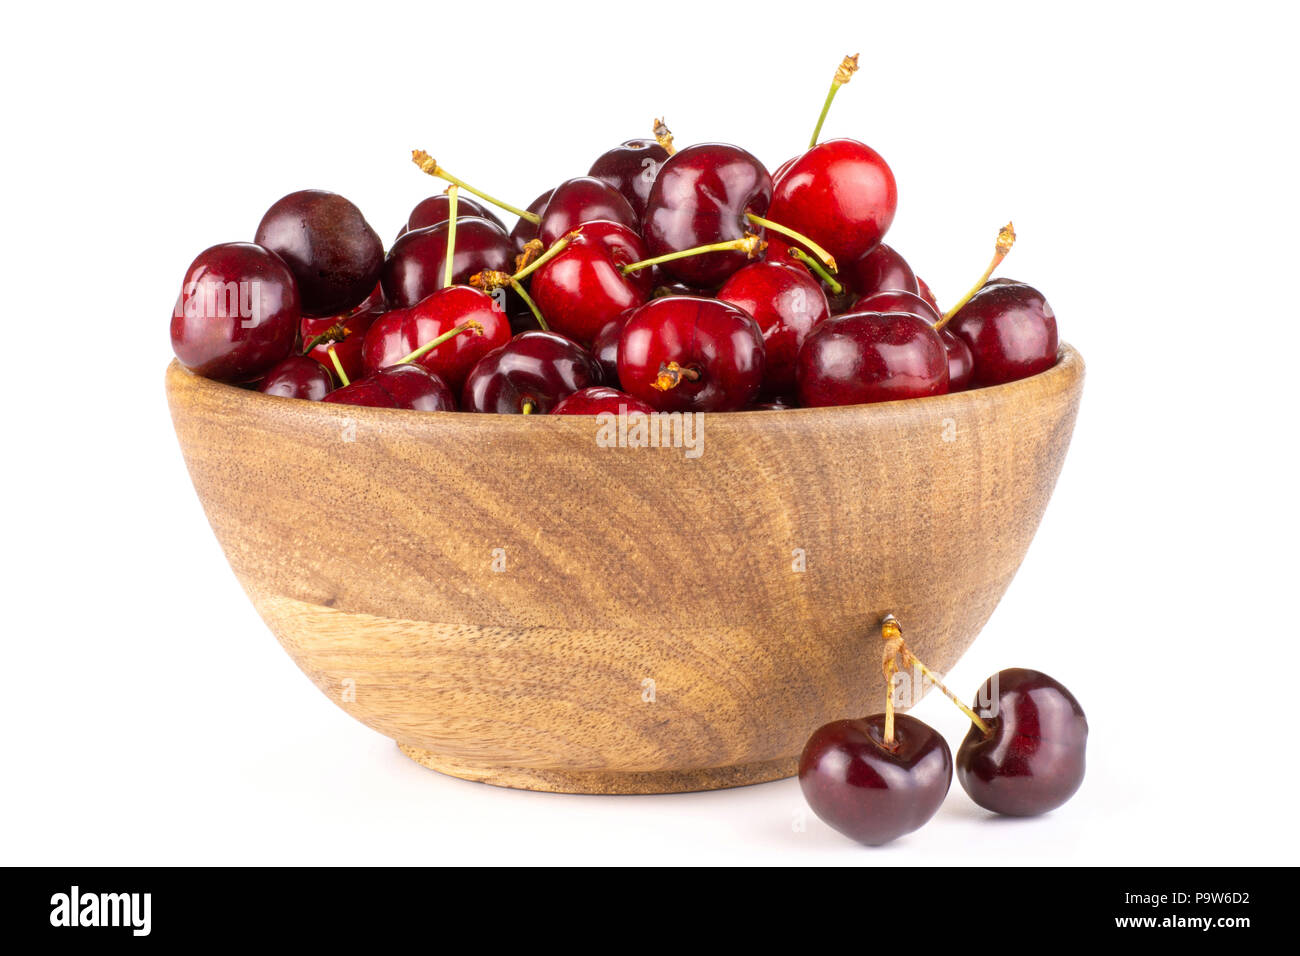 Sweet bright red cherry in a wooden bowl and two is near it isolated on white Stock Photo